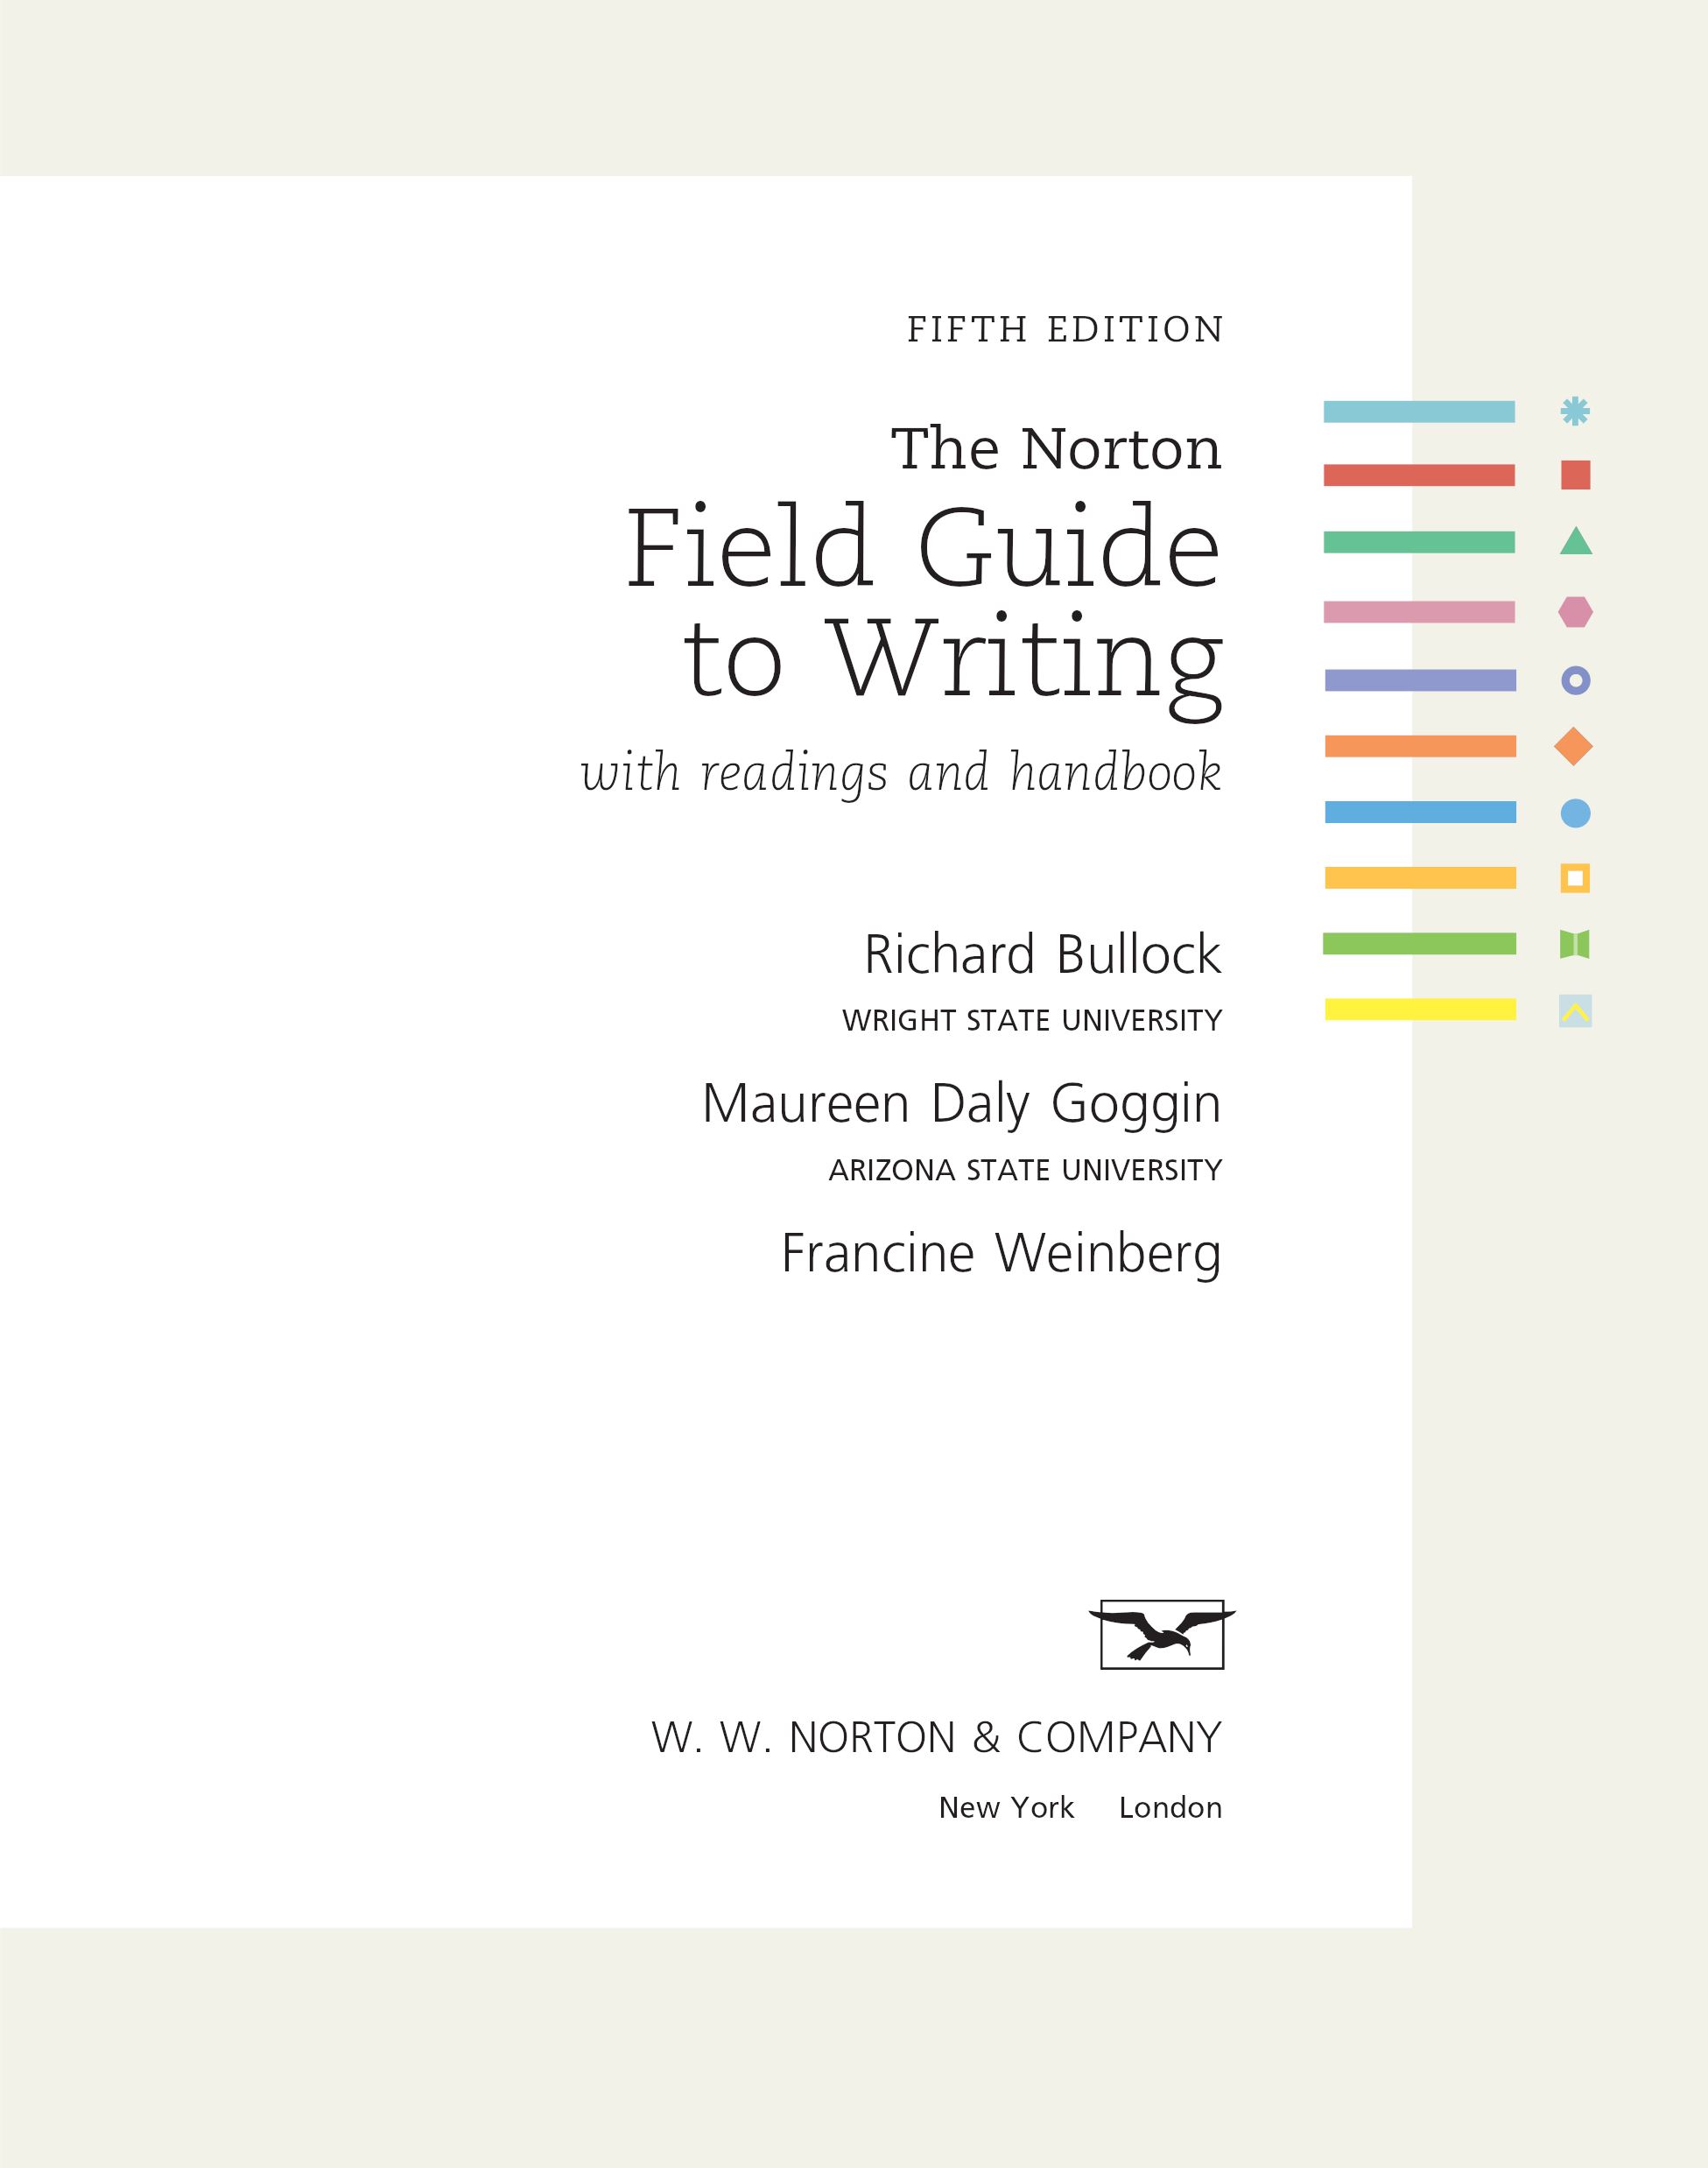 The Norton Field Guide to Writing with readings and handbook, 5E page 4